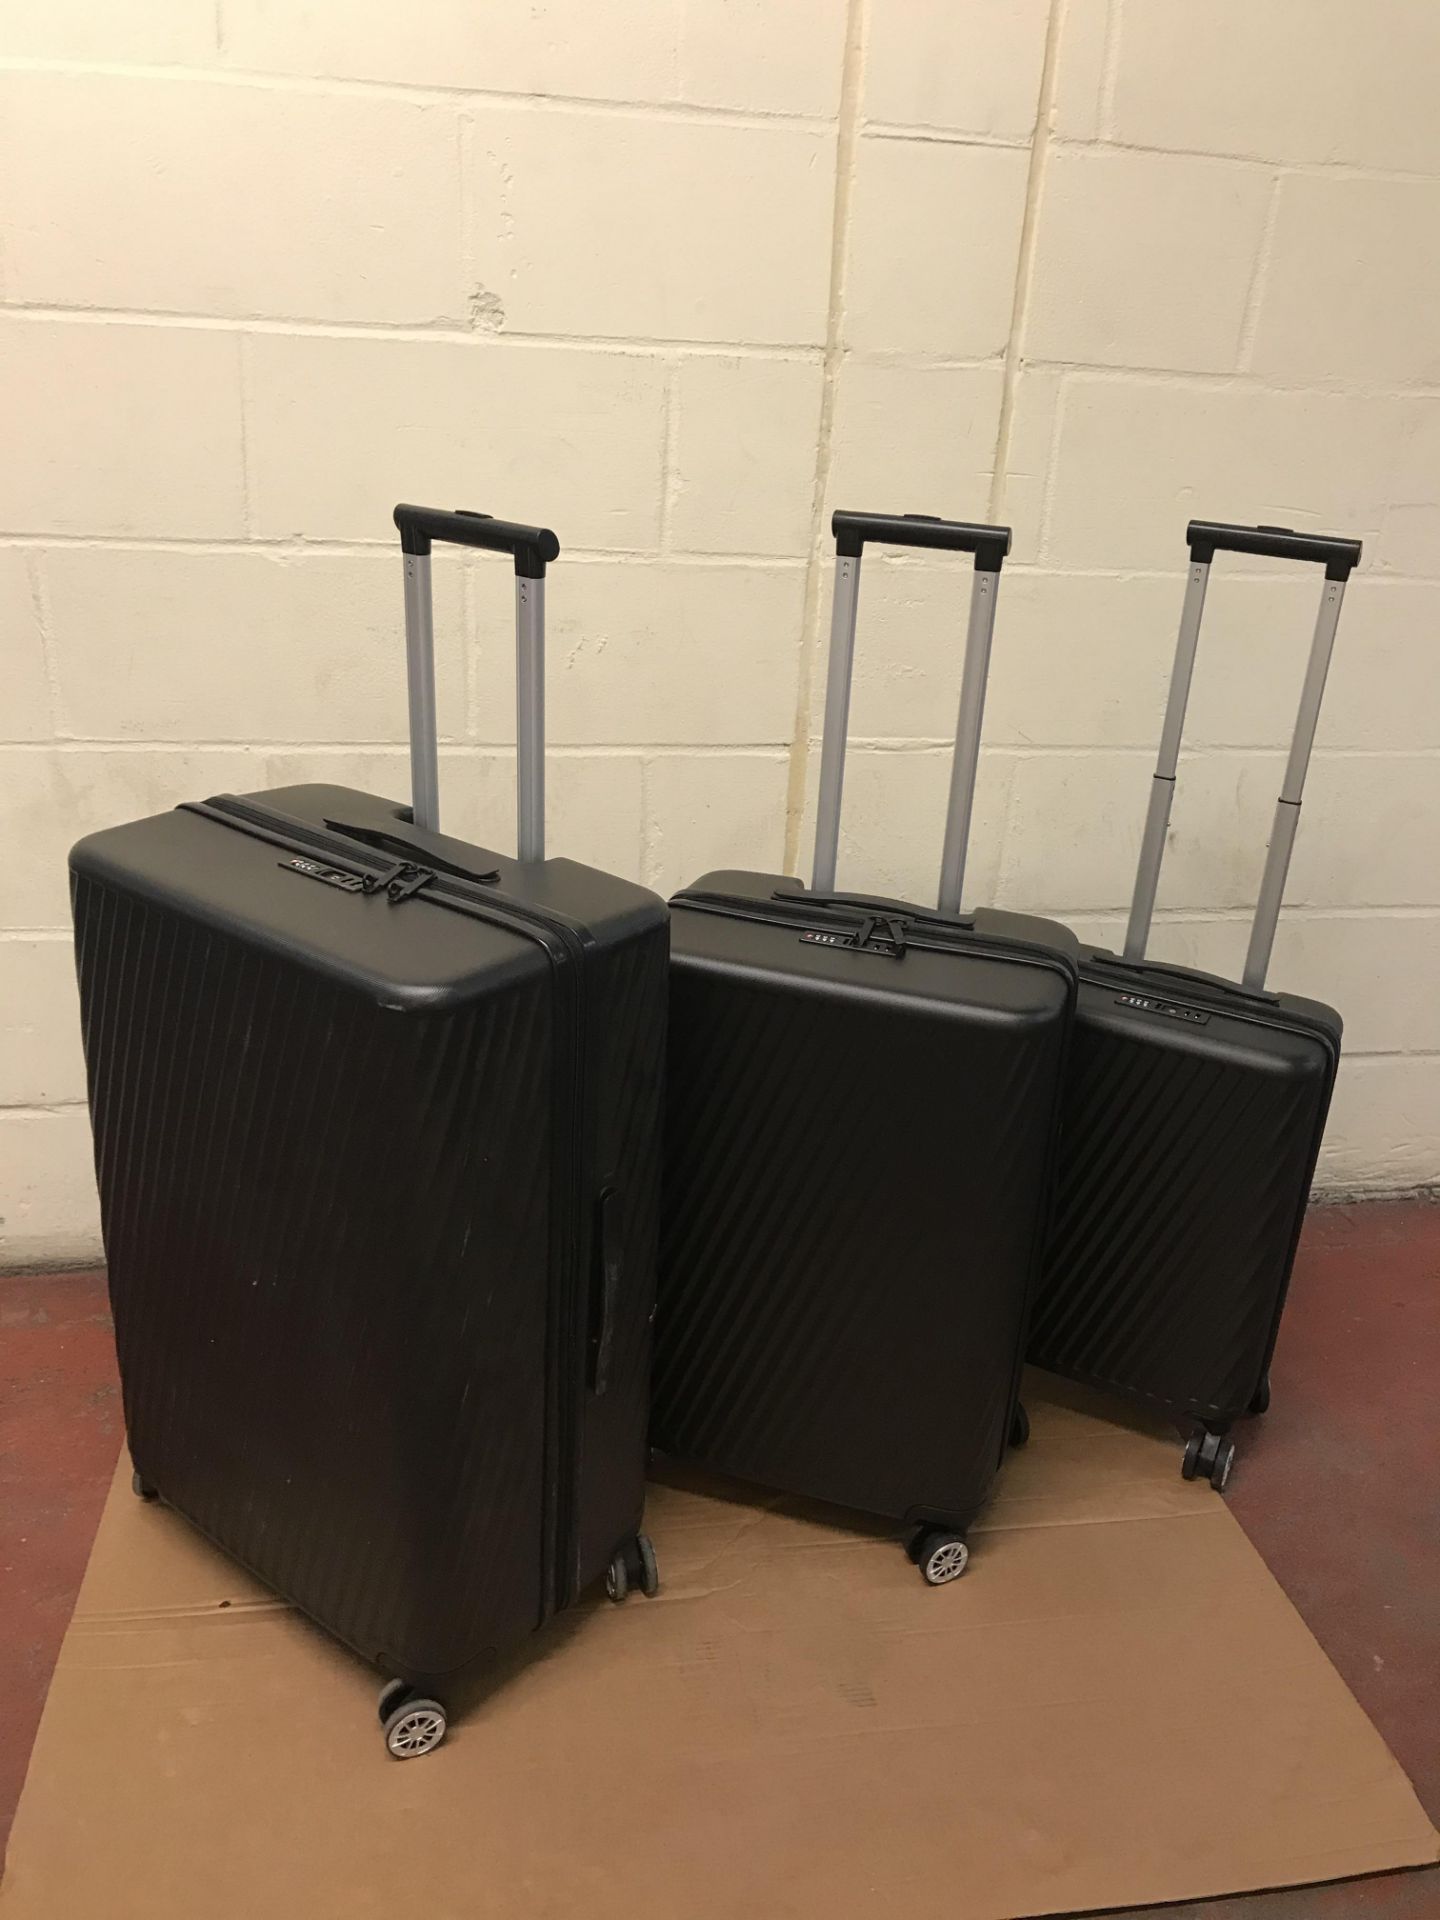 Ultralight 4 Wheel Hard Suitcases Set with Security Zip (zip on large case damaged, image) RRP £229 - Image 2 of 3